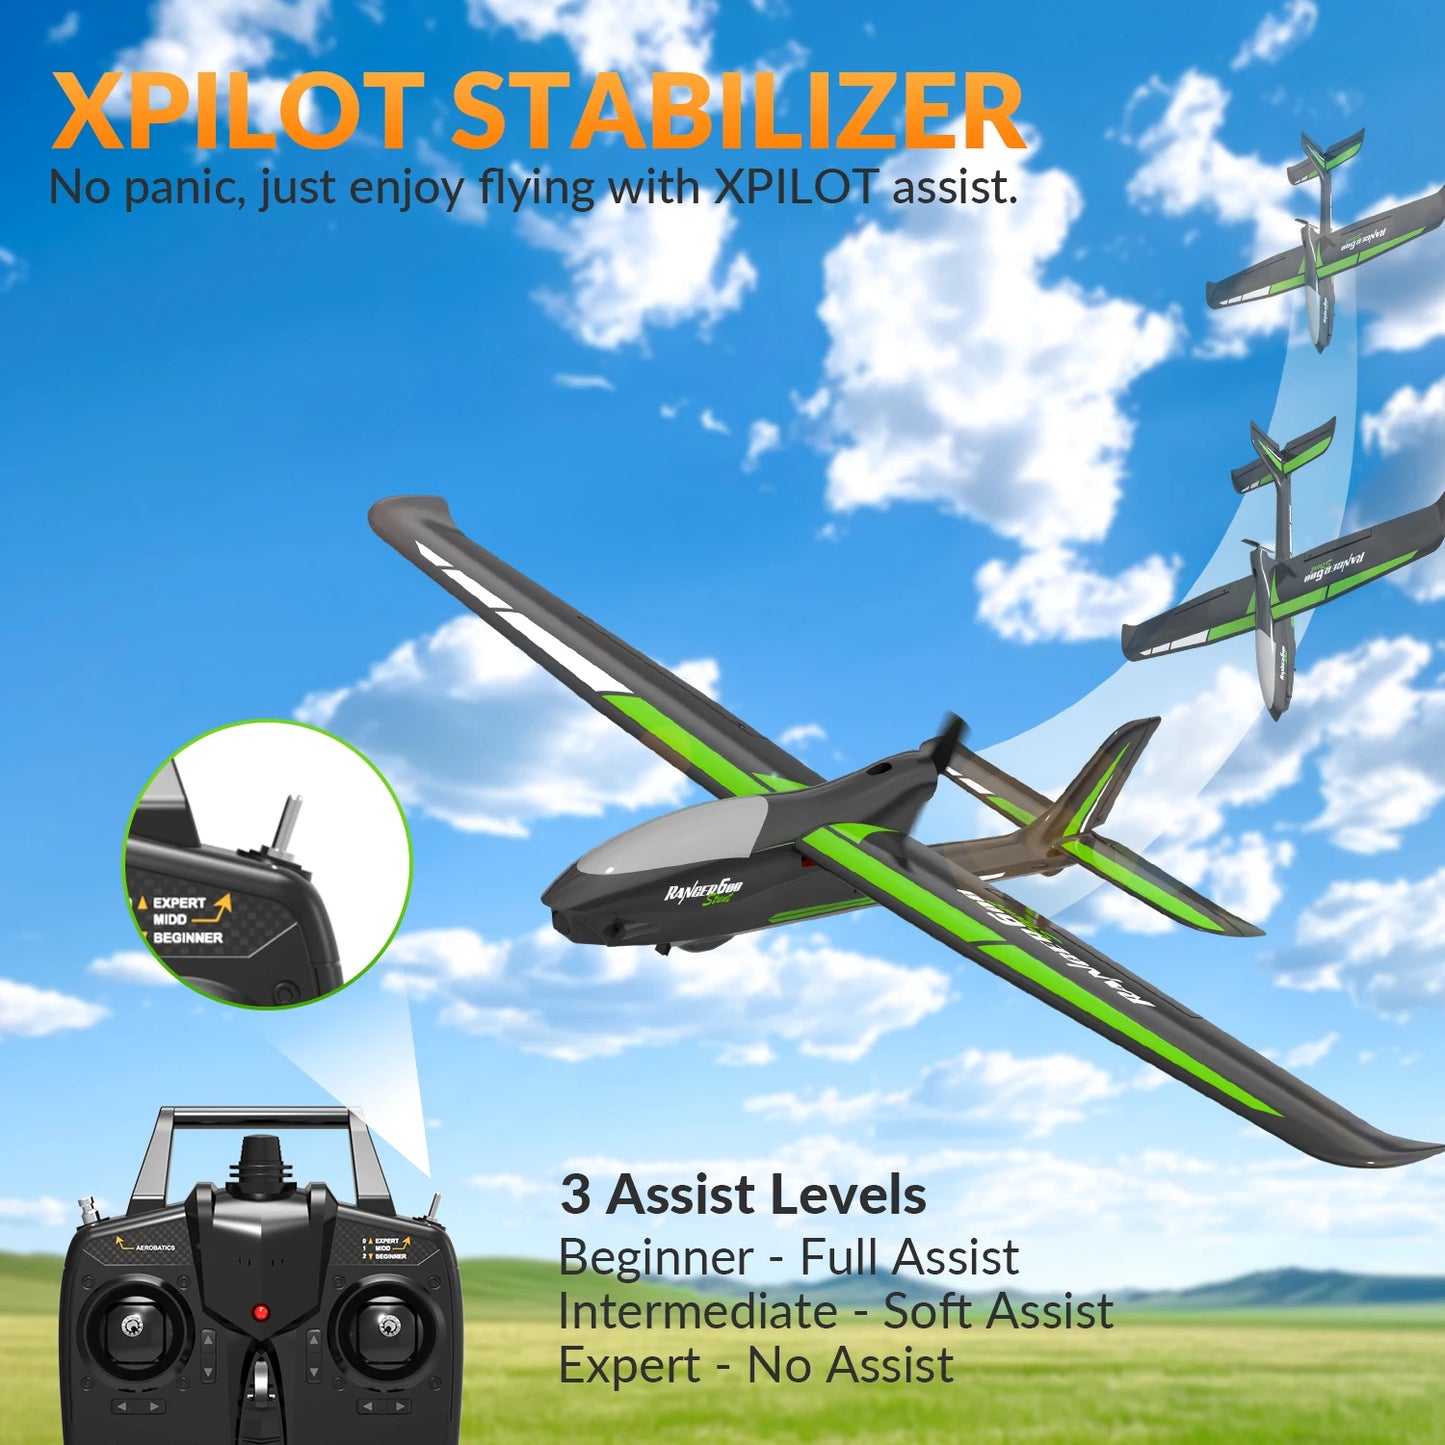 Ultimate Volantex Ranger600 RC Plane - Ready-to-Fly Outdoor Aircraft with Gyro Stabilizer